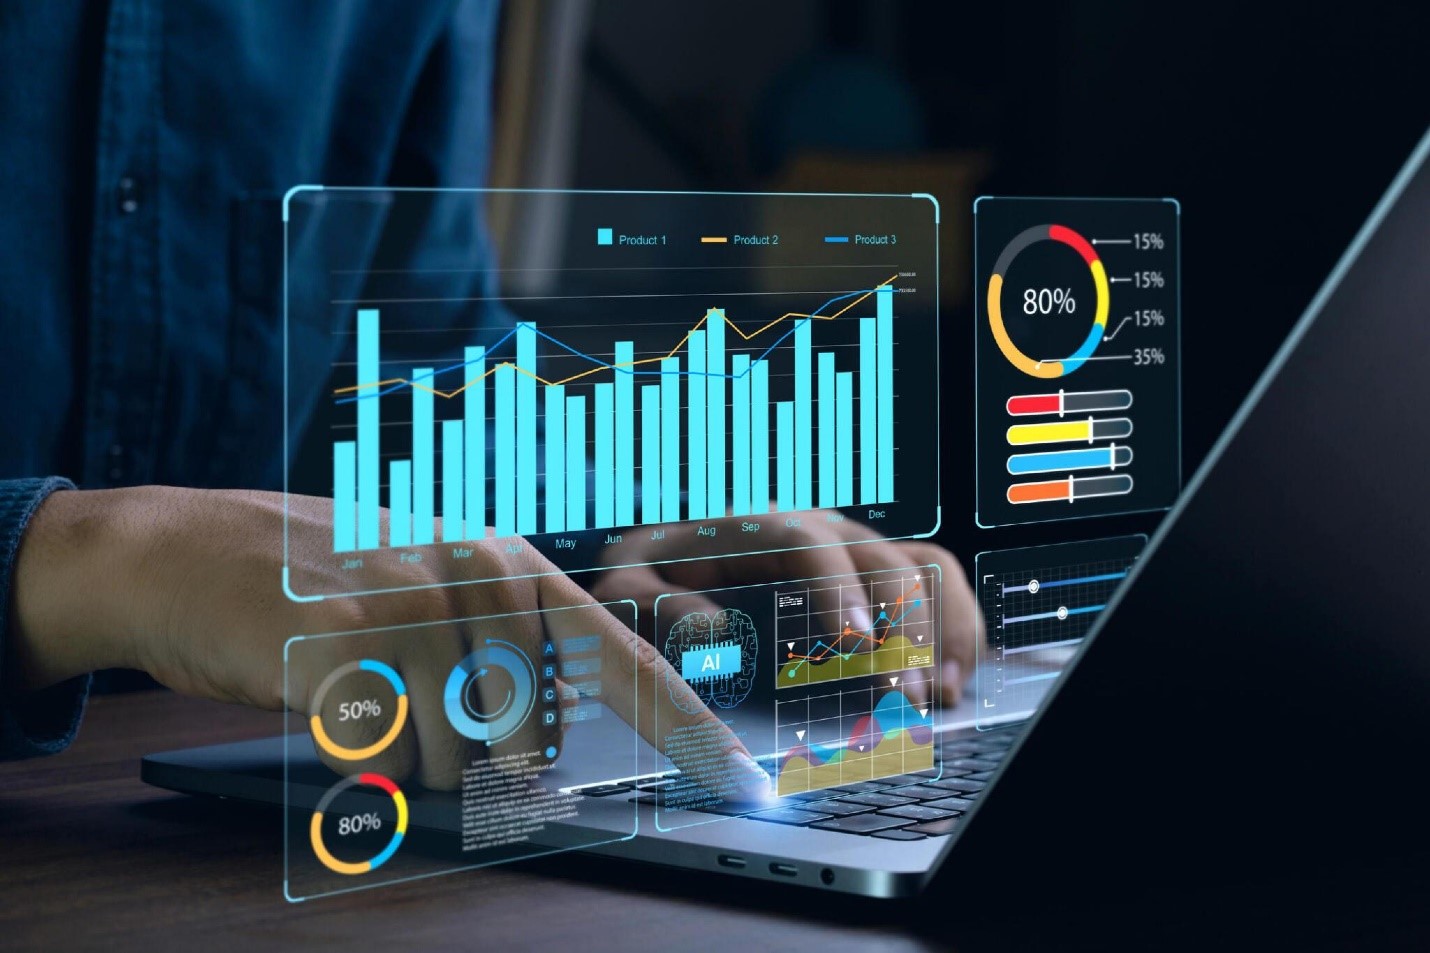 Businessman works on laptop Showing business analytics dashboard with charts, metrics, and KPI to analyze performance and create insight reports for operations management.